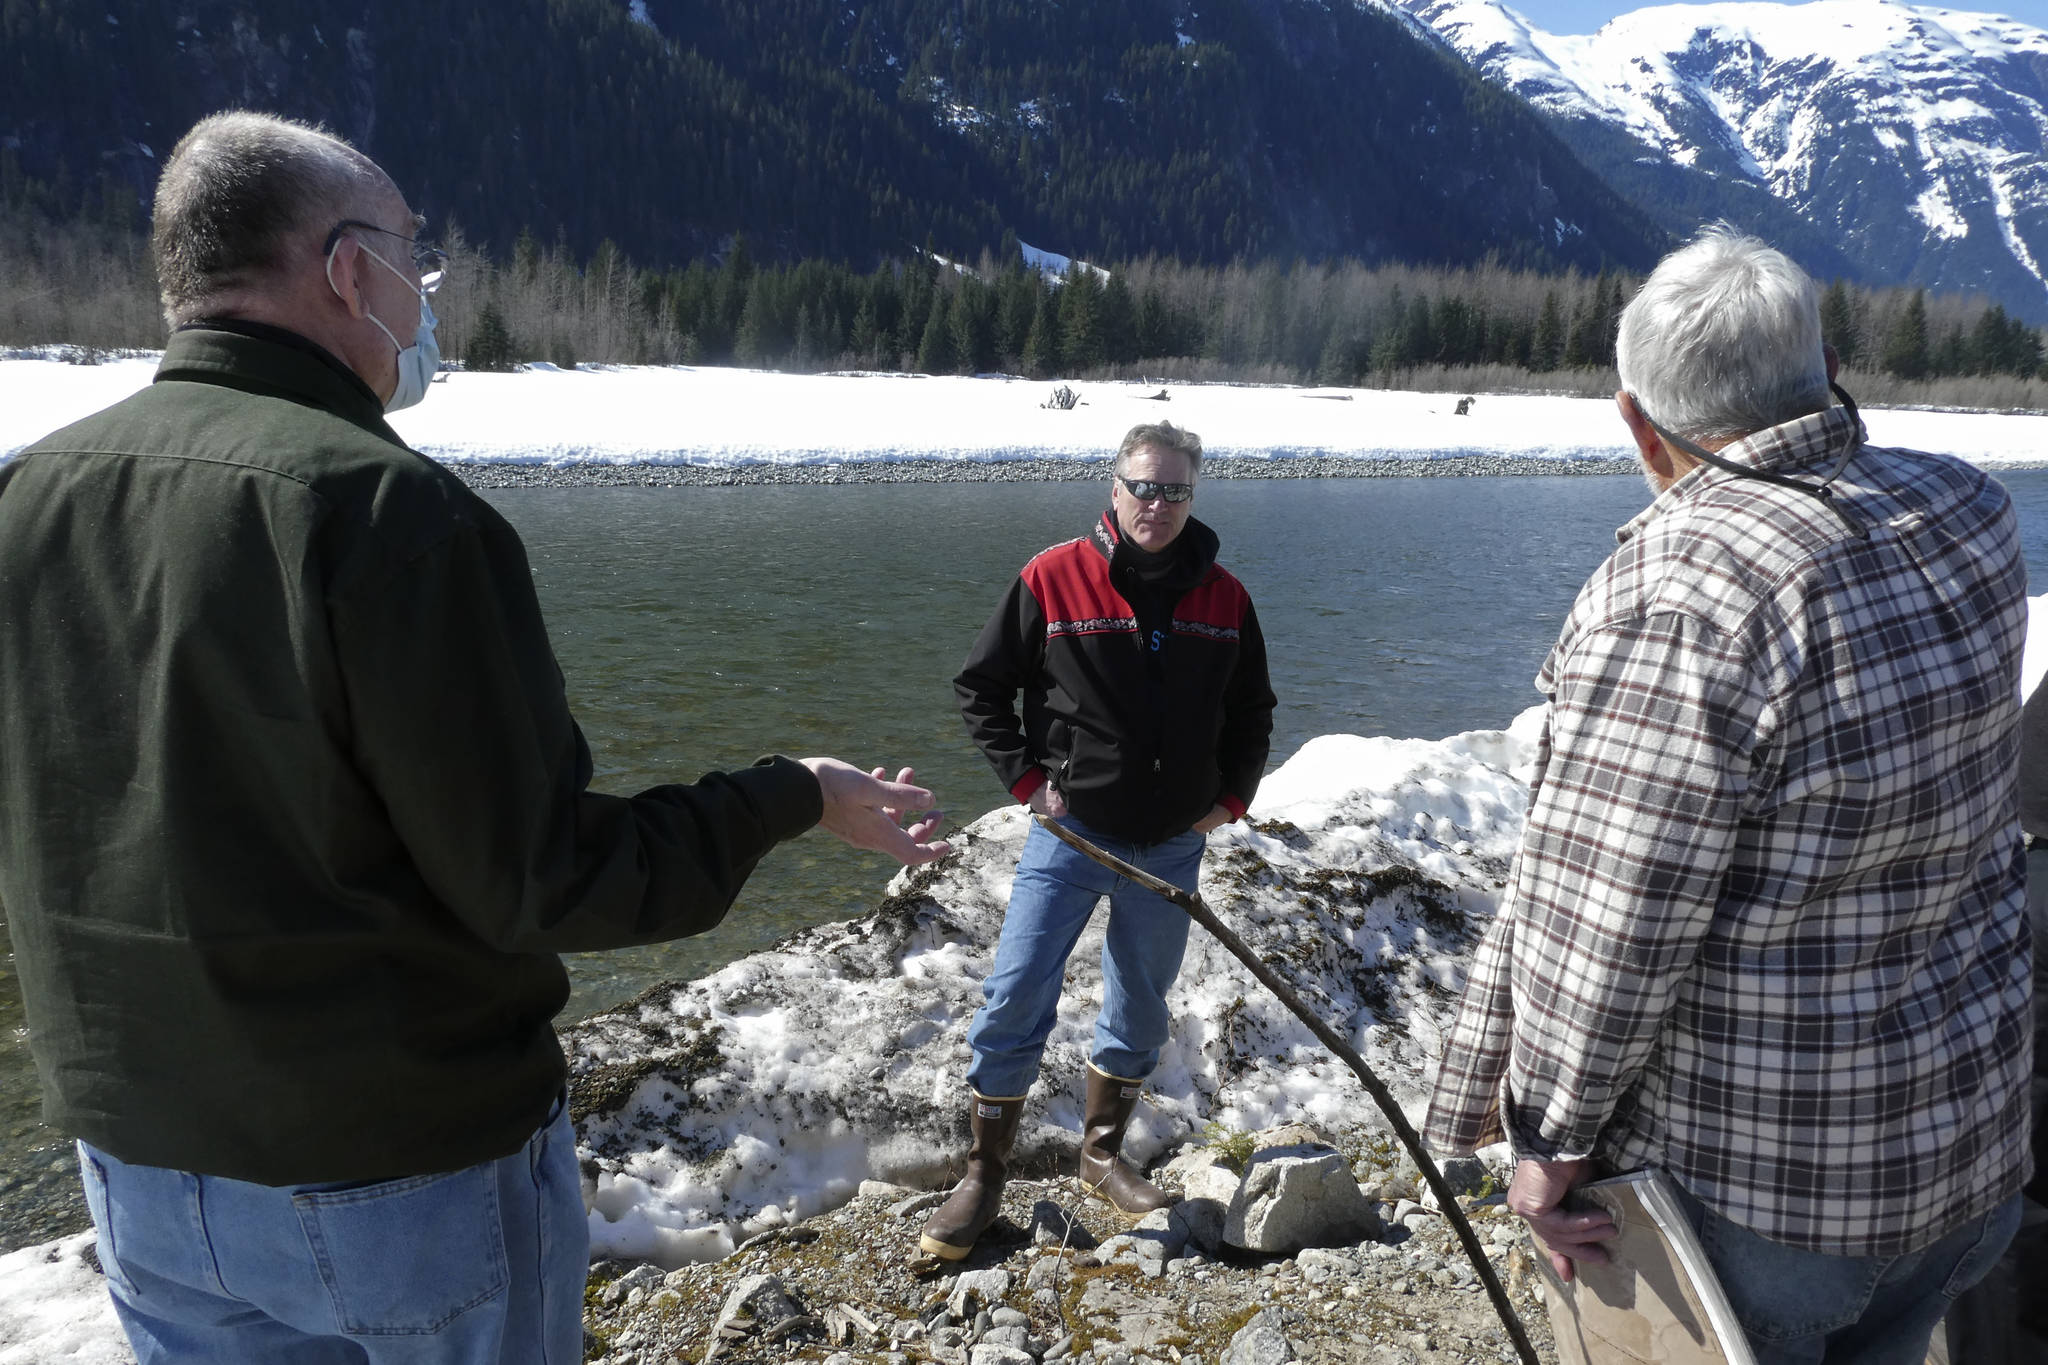 Alaska Gov. Mike Dunleavy, center, listens as residents discuss a levee they have concerns with on Thursday, April 22, 2021, in Hyder, Alaska. Hyder was among the Southeast Alaska communities that Dunleavy visited as part of a one-day trip. (AP Photo / Becky Bohrer)